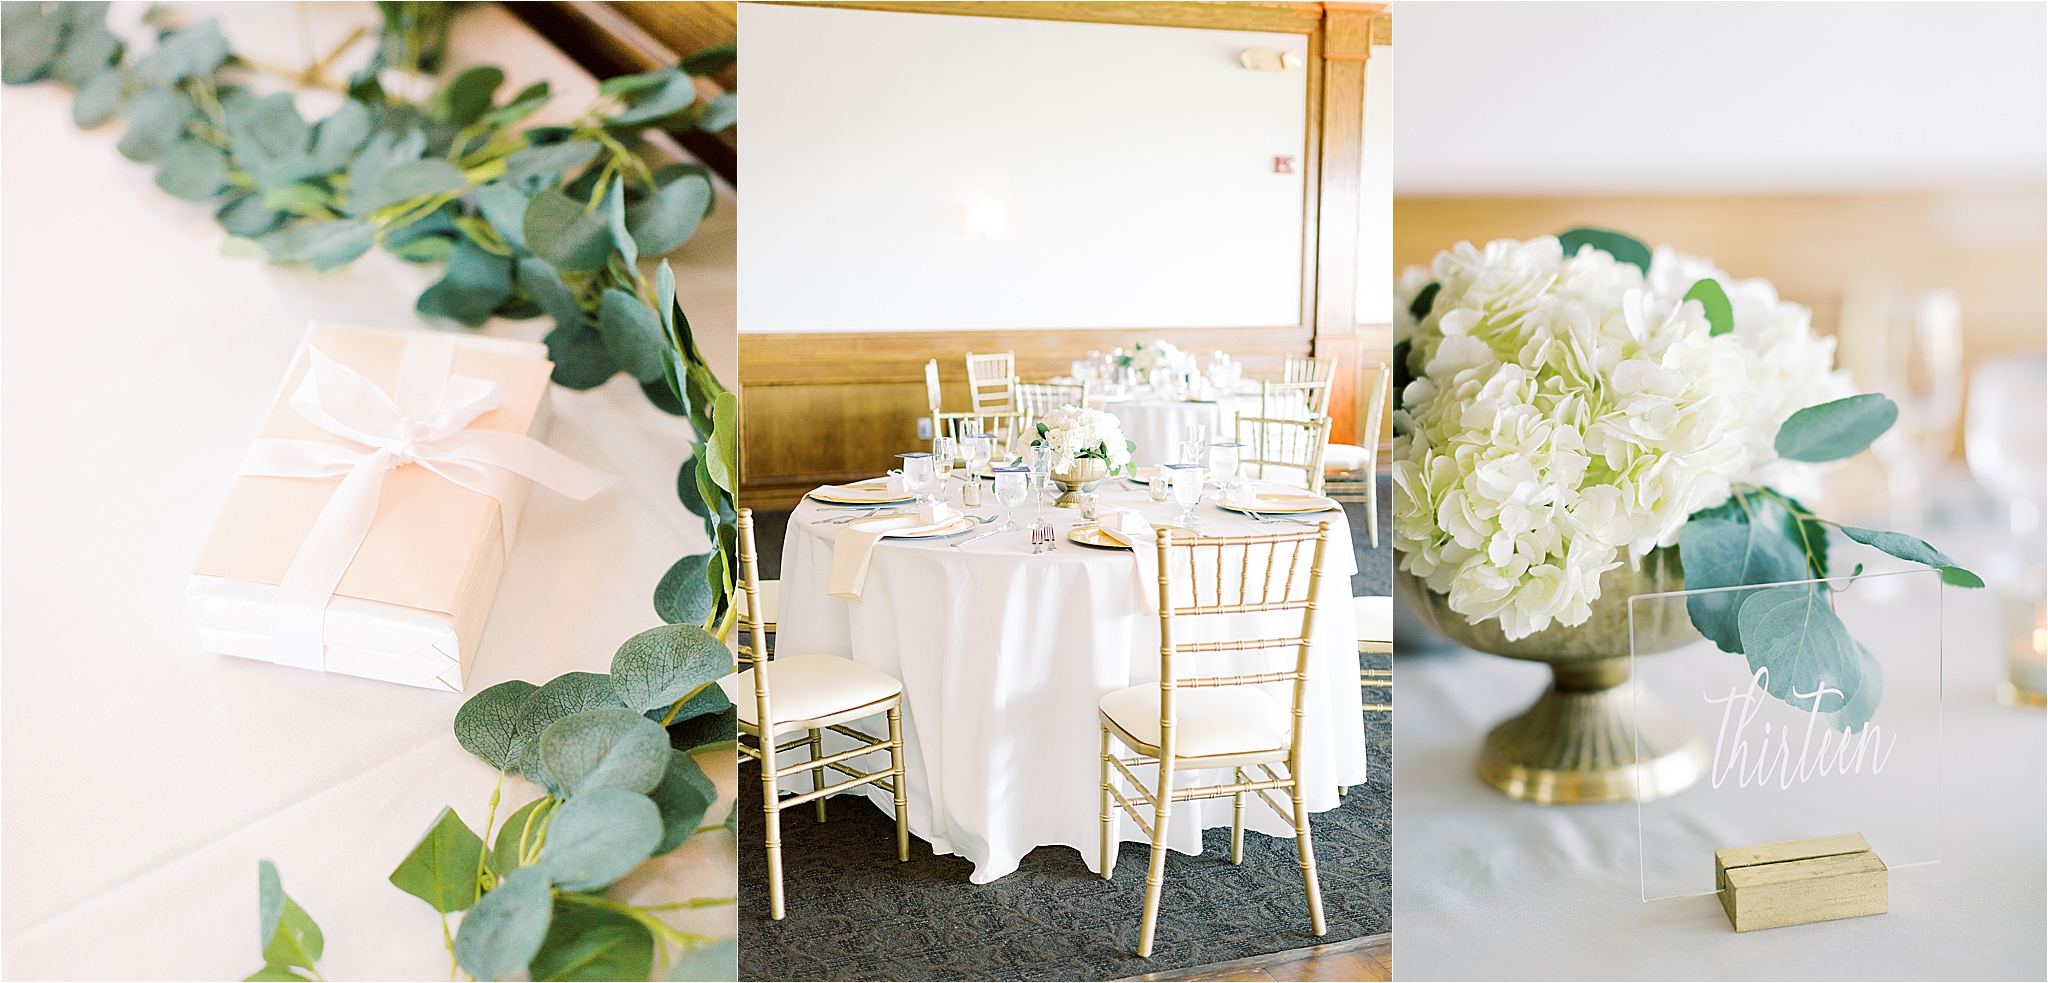 gold, white, and greenery details at cleveland wedding reception